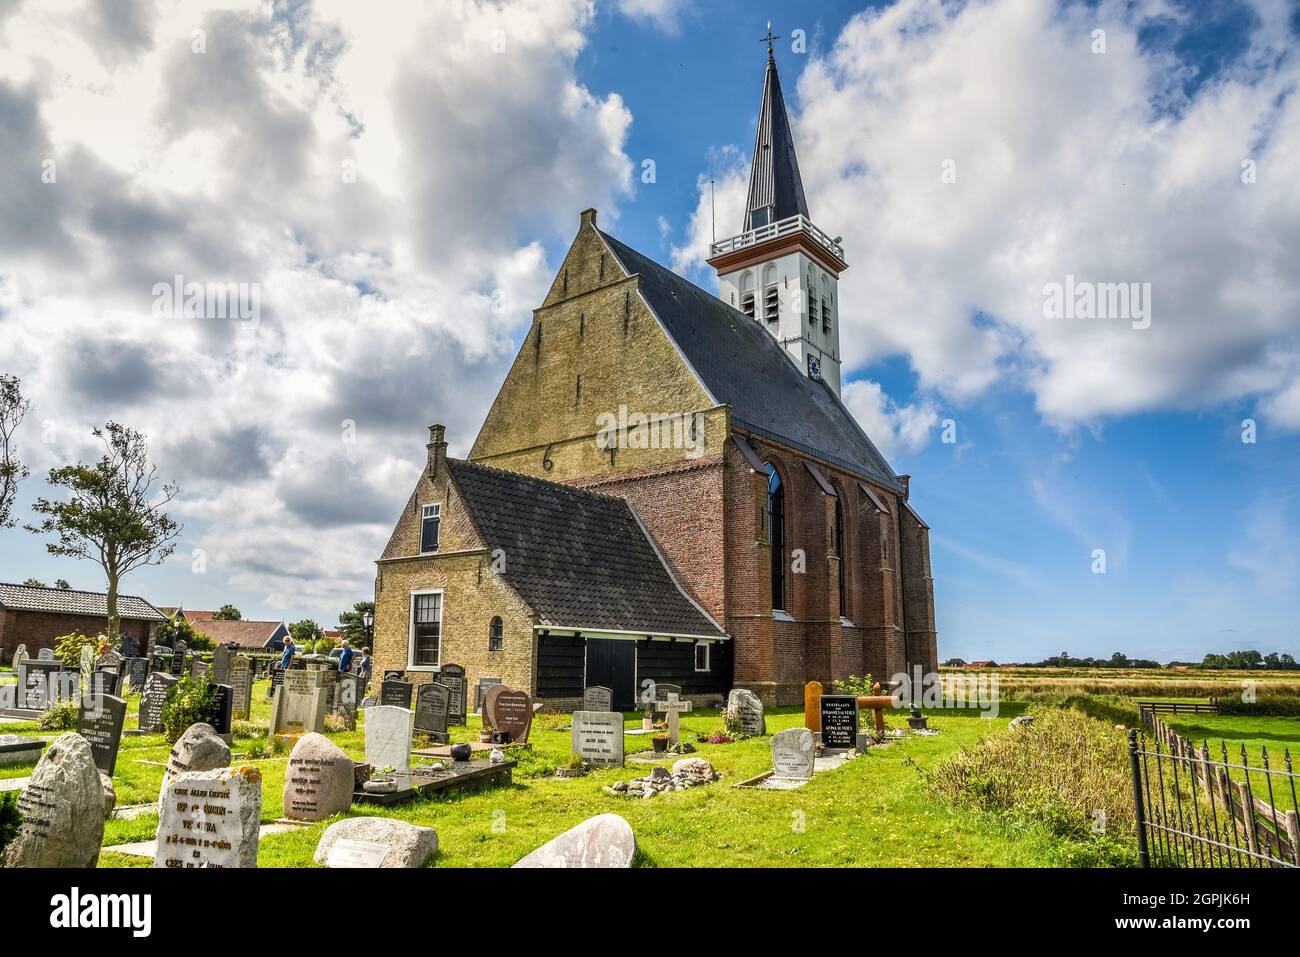 Den Hoorn, Texel, the Netherlands. August 2021. The little church of the village Den Hoorn on the island of Texel. High quality photo Stock Photo